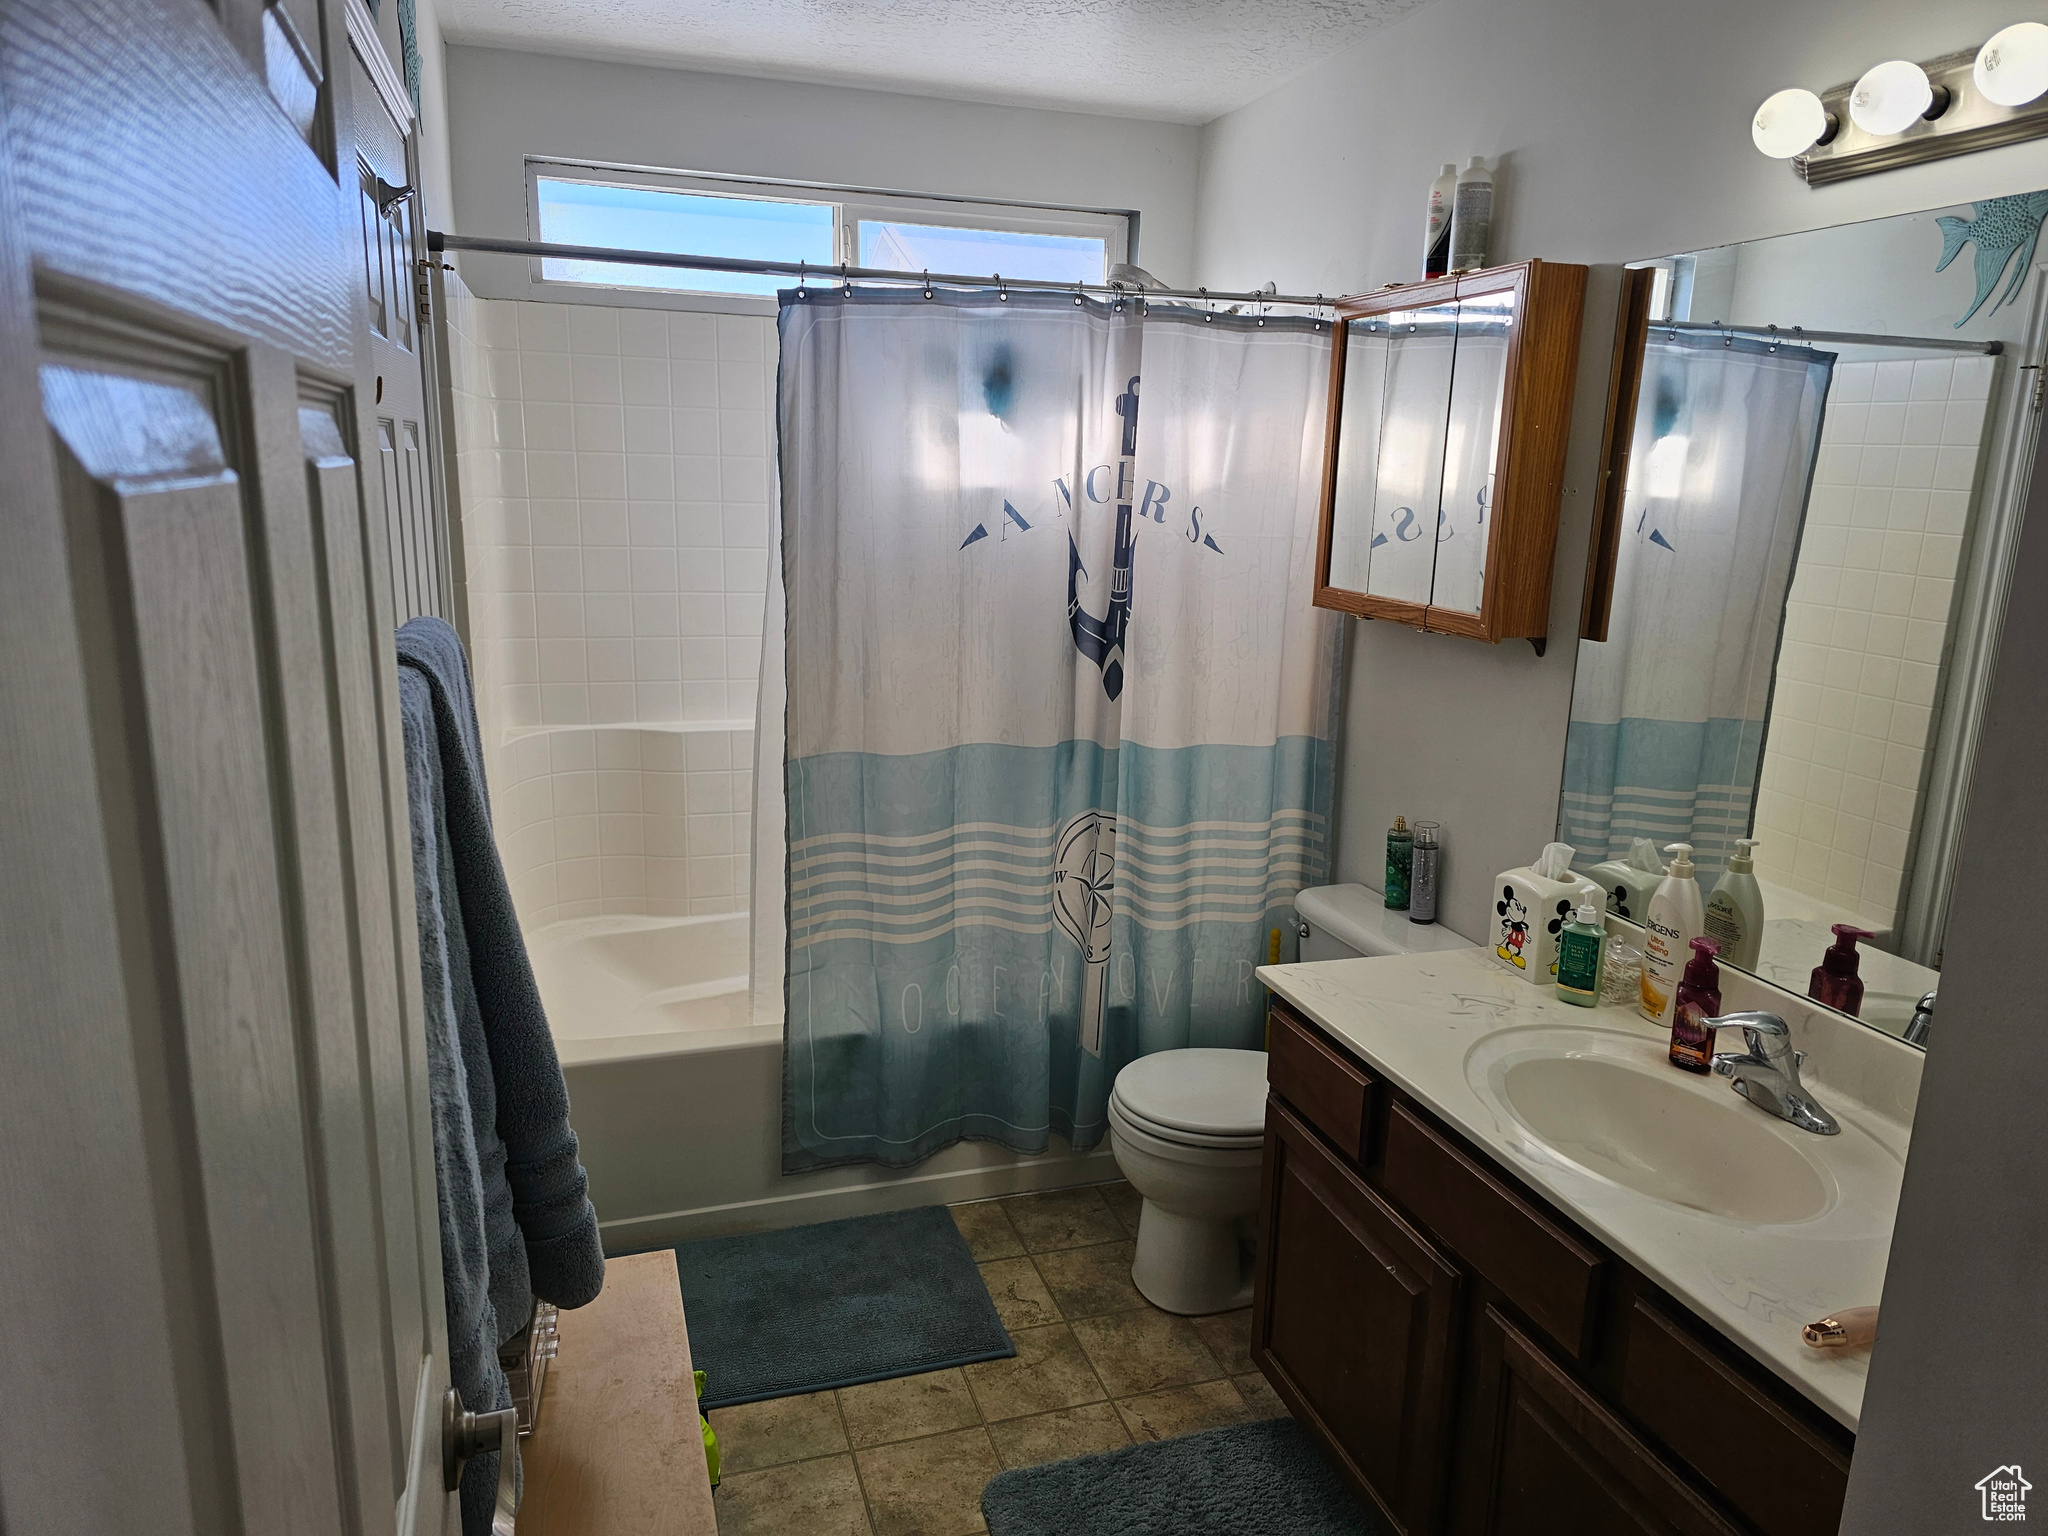 Full bathroom featuring a textured ceiling, large vanity, toilet, tile flooring, and shower / tub combo